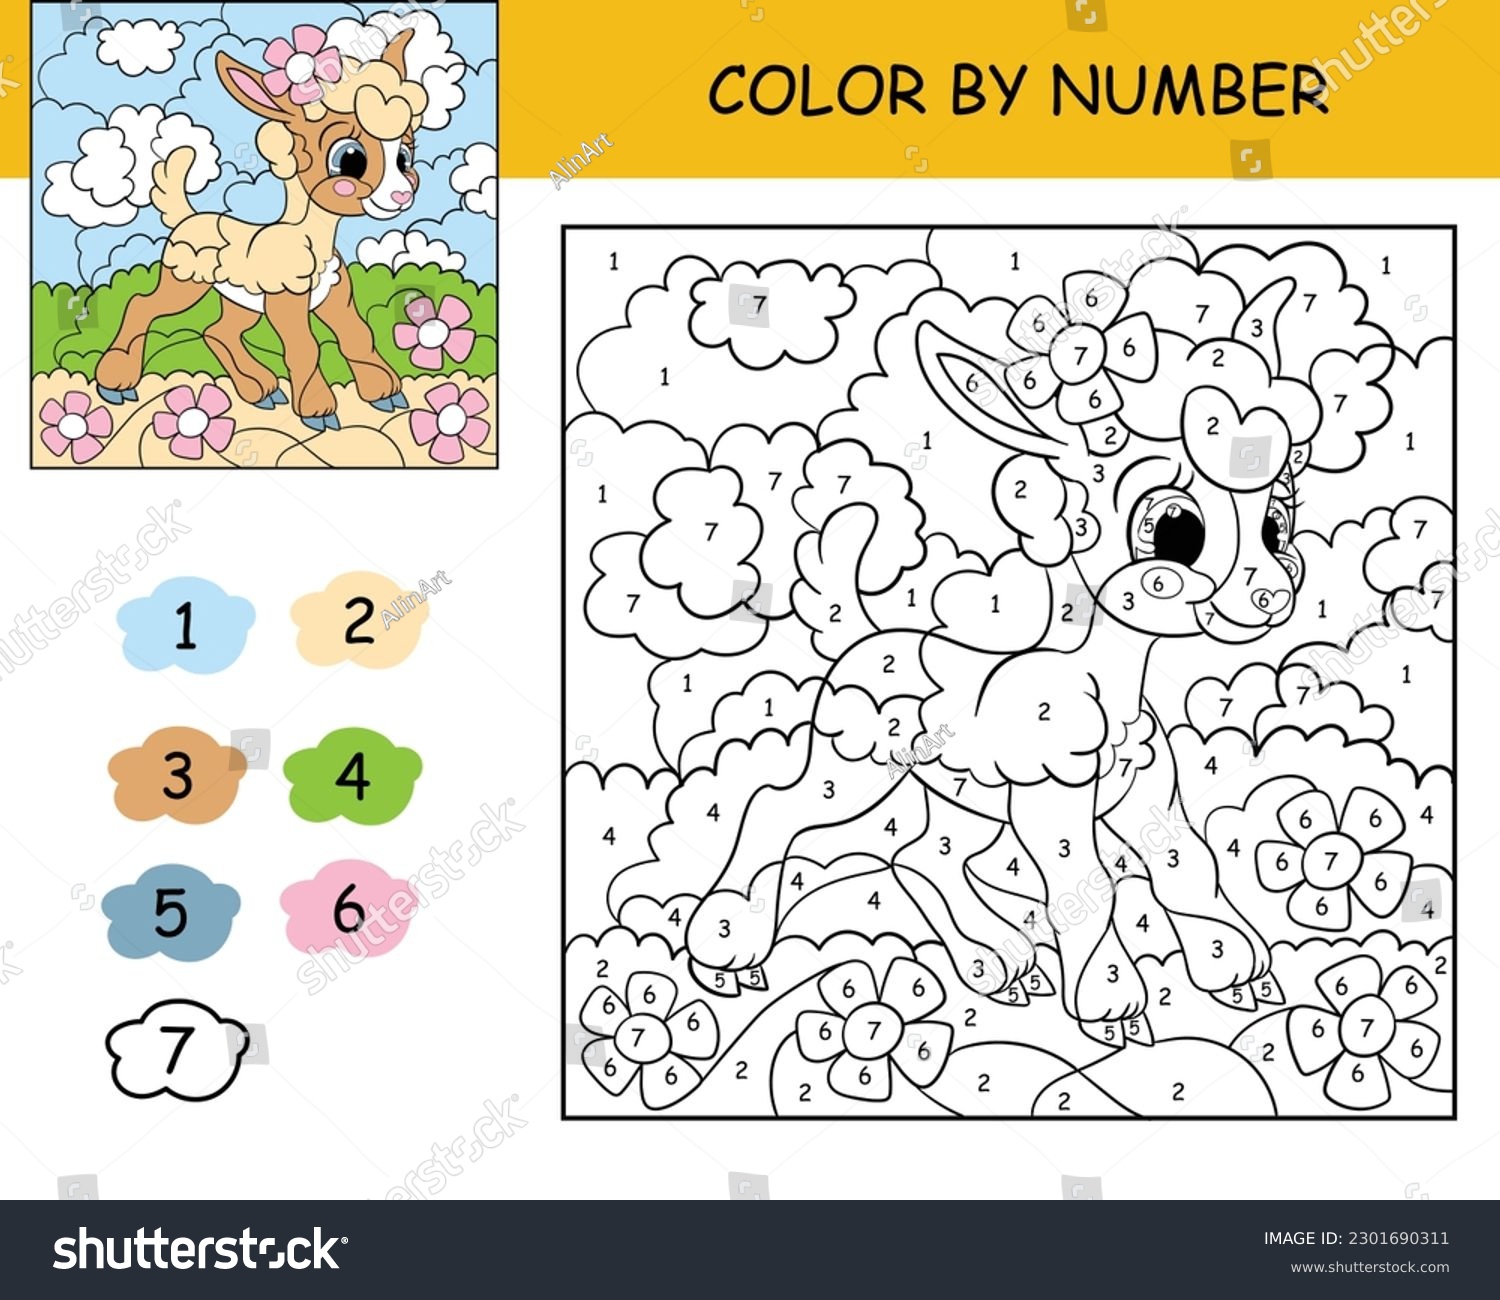 Coloring puzzle number color kids cute stock vector royalty free